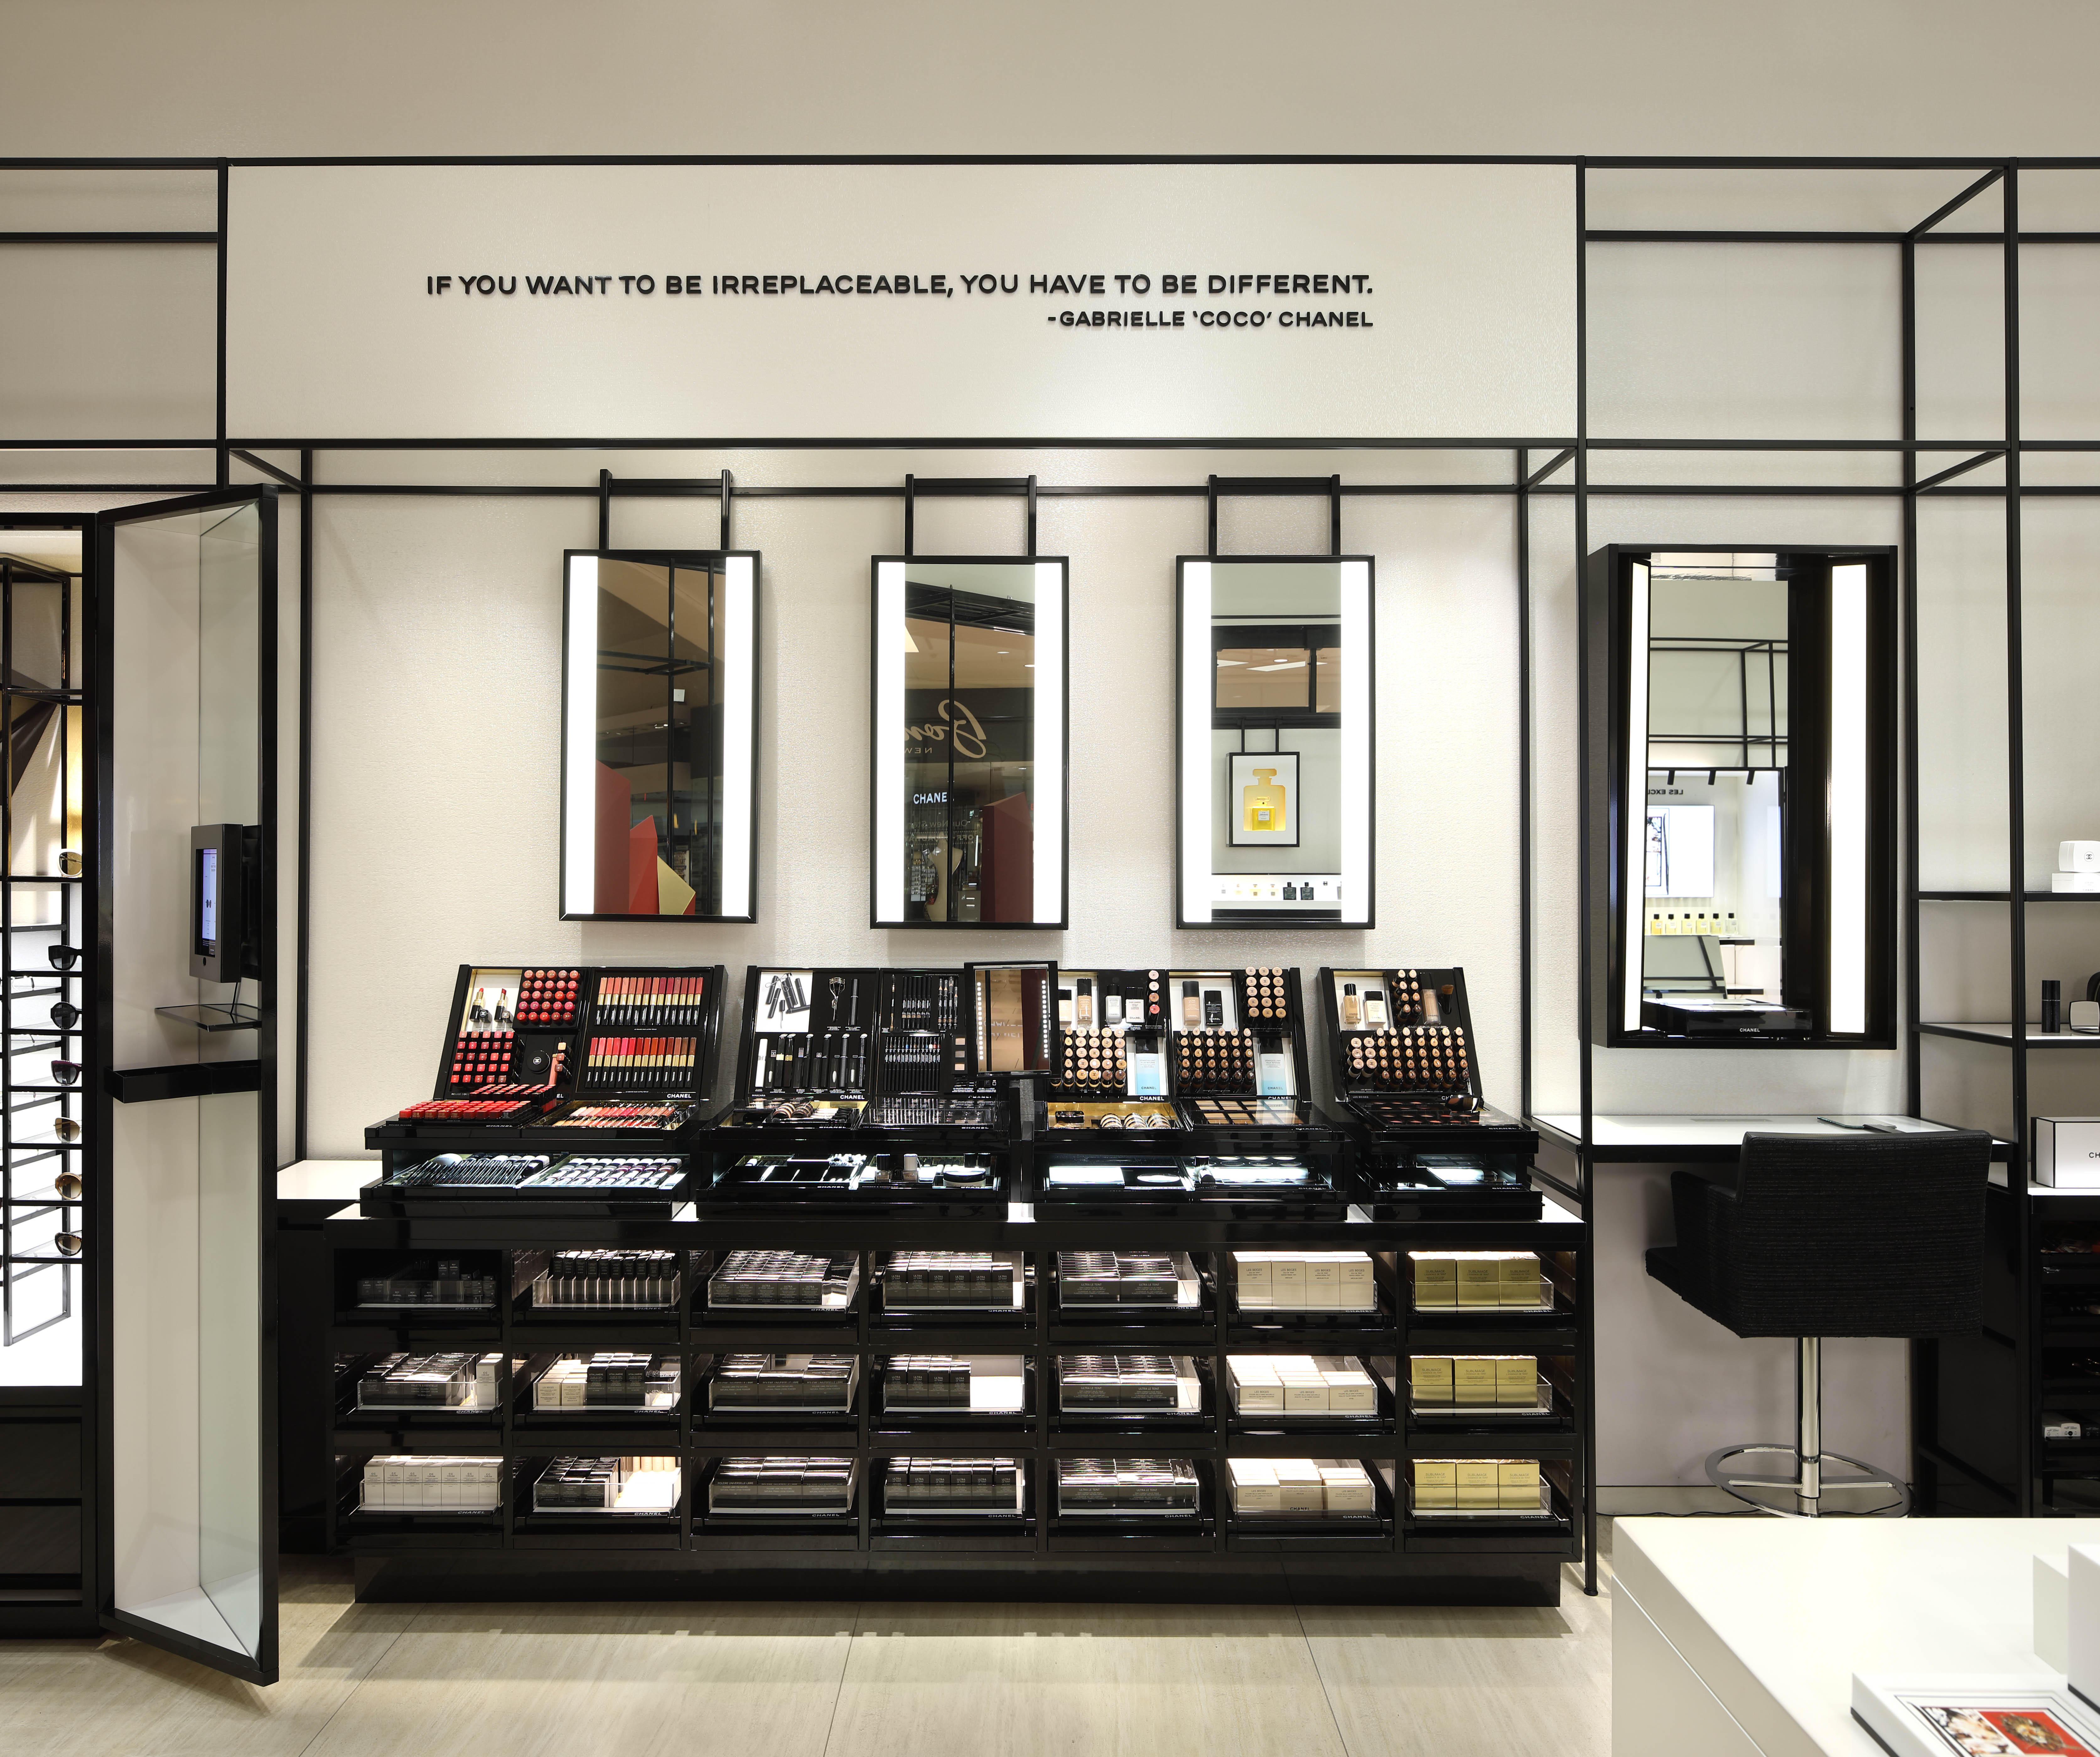 CHANEL FRAGRANCE AND BEAUTY BOUTIQUE, Aventura